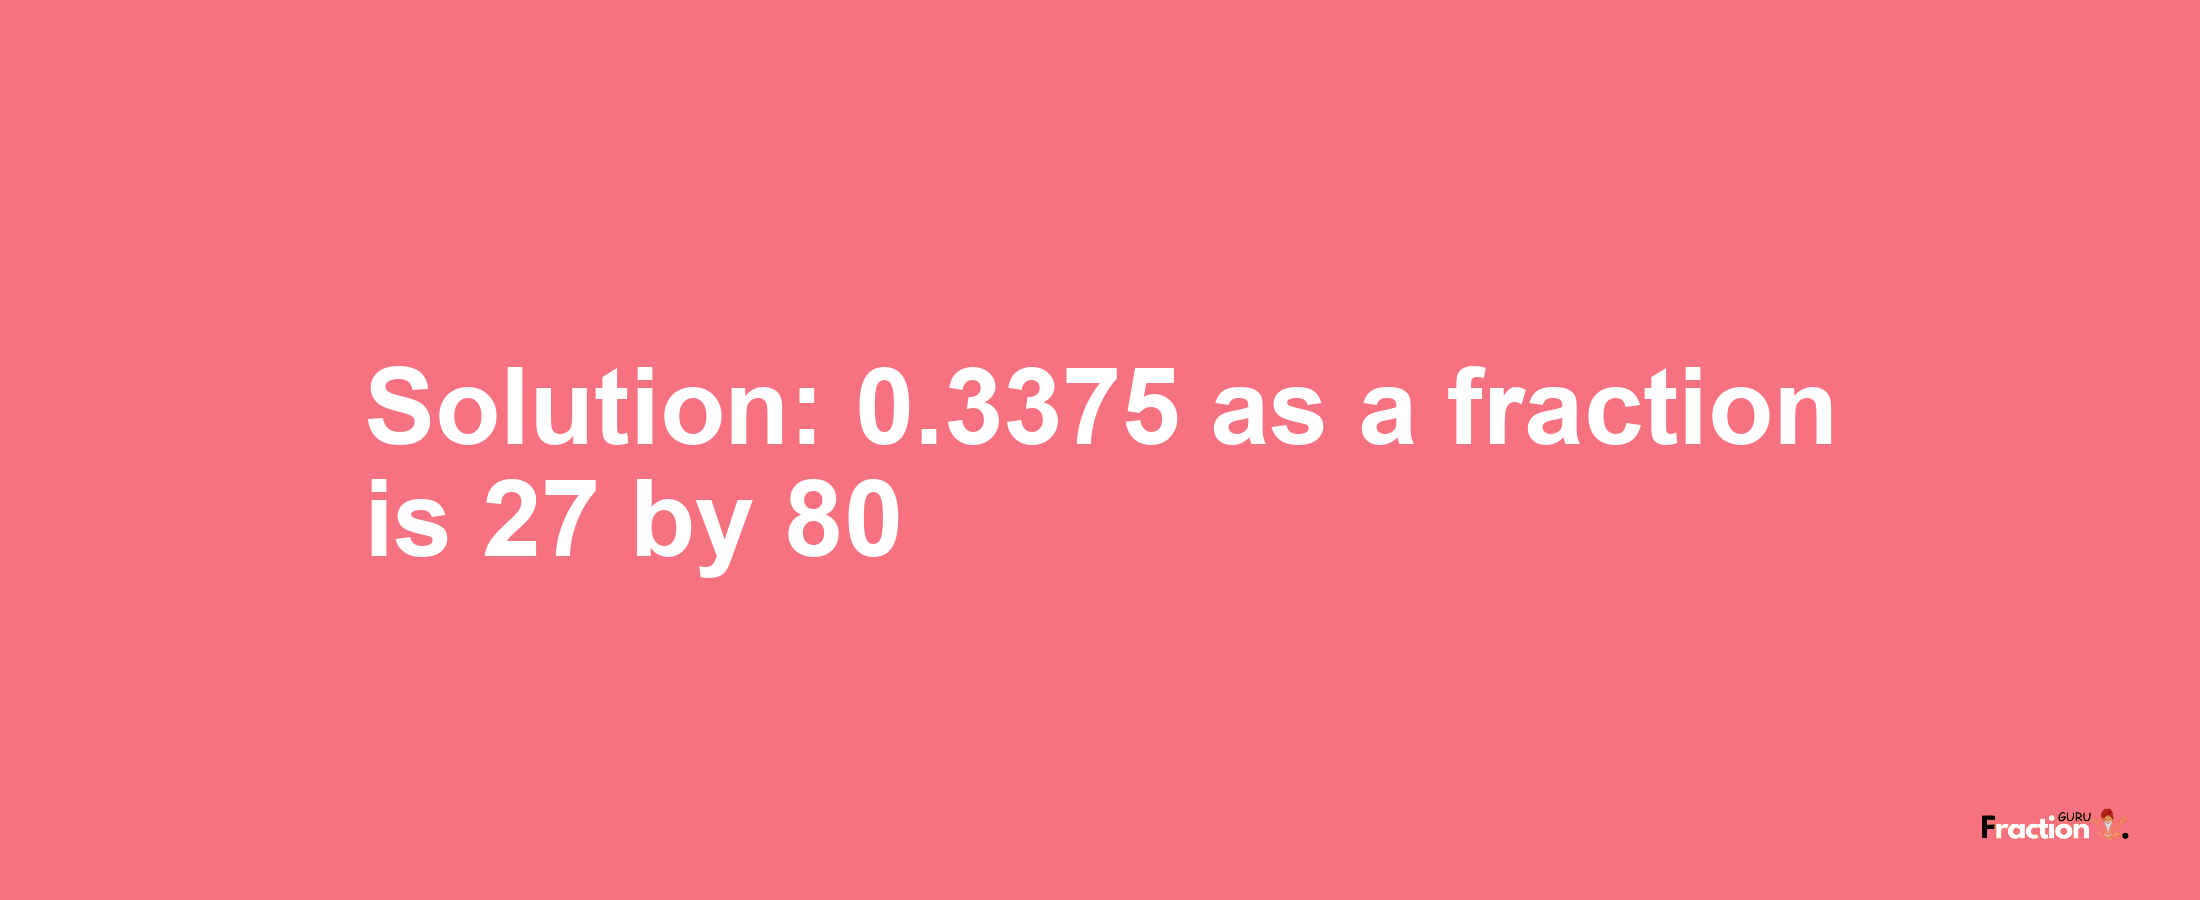 Solution:0.3375 as a fraction is 27/80